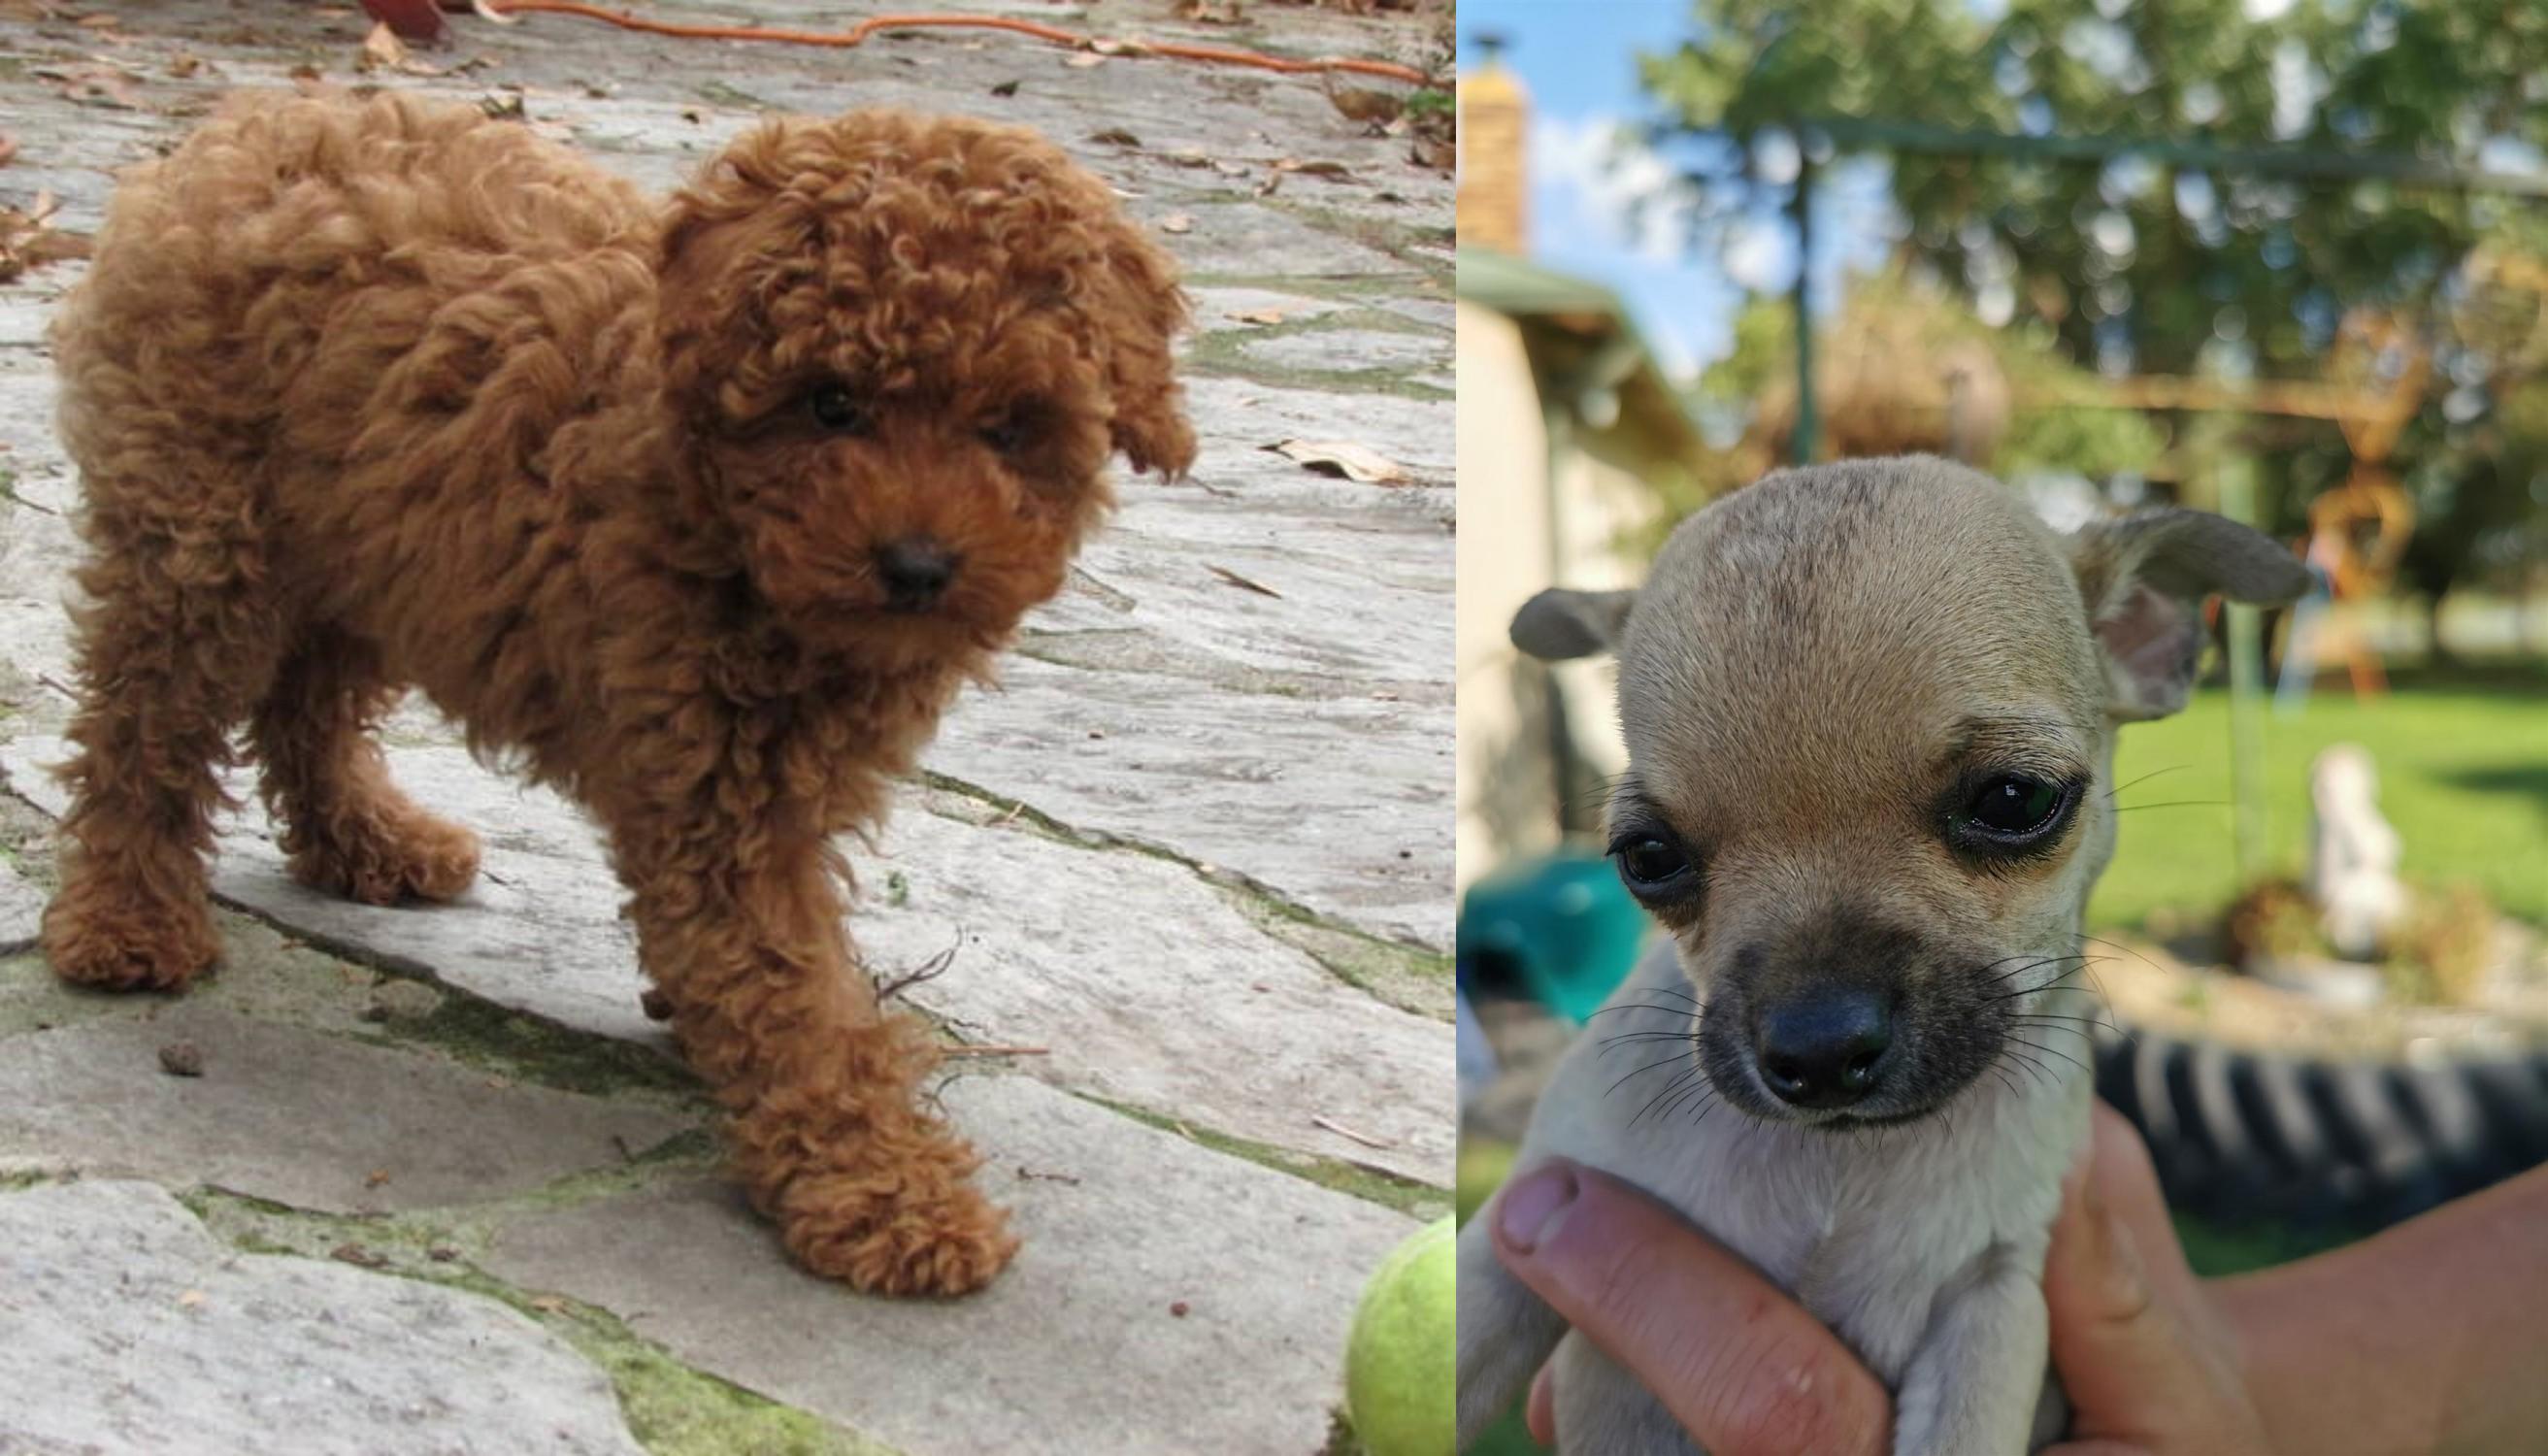 toy poodle chihuahua